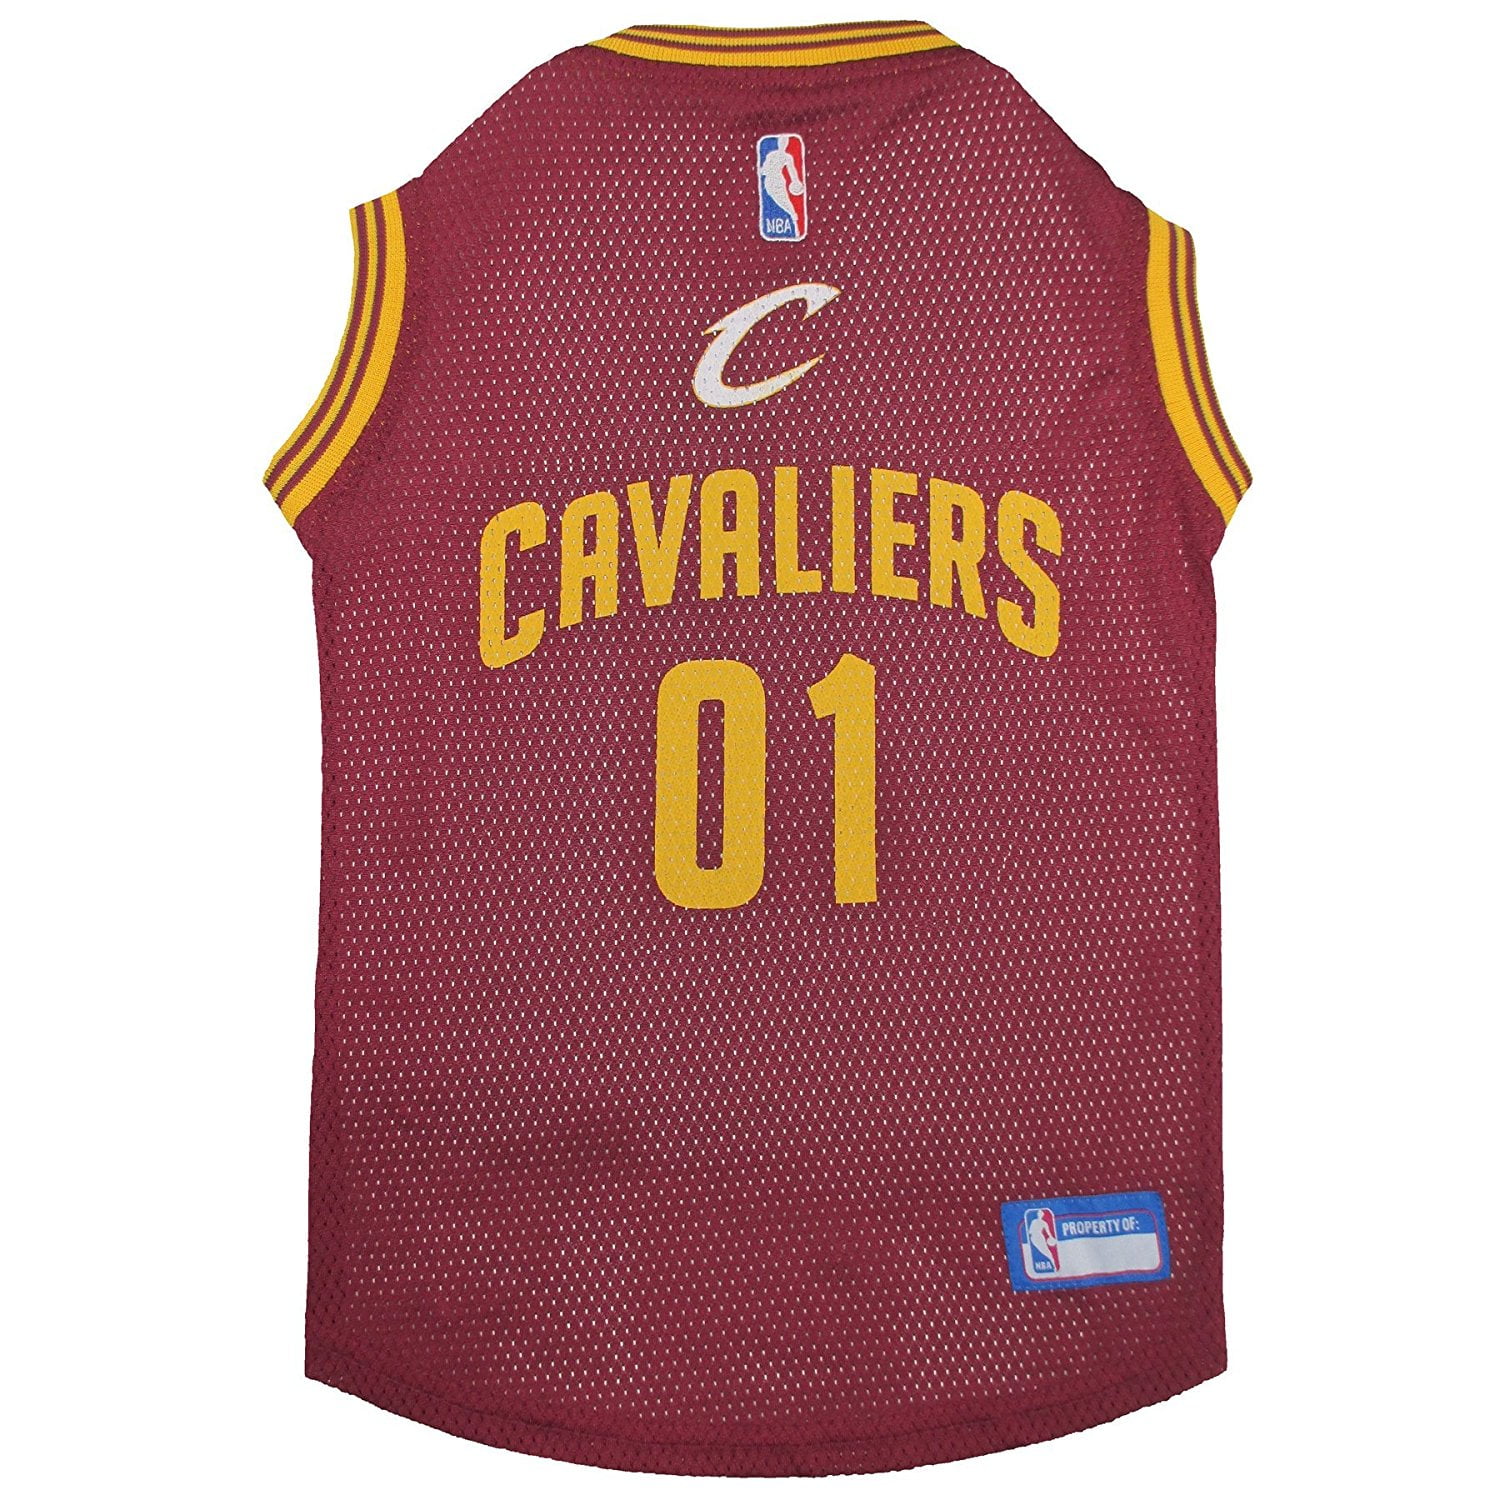  Cleveland Cavaliers Christmas Ornament : Sports & Outdoors